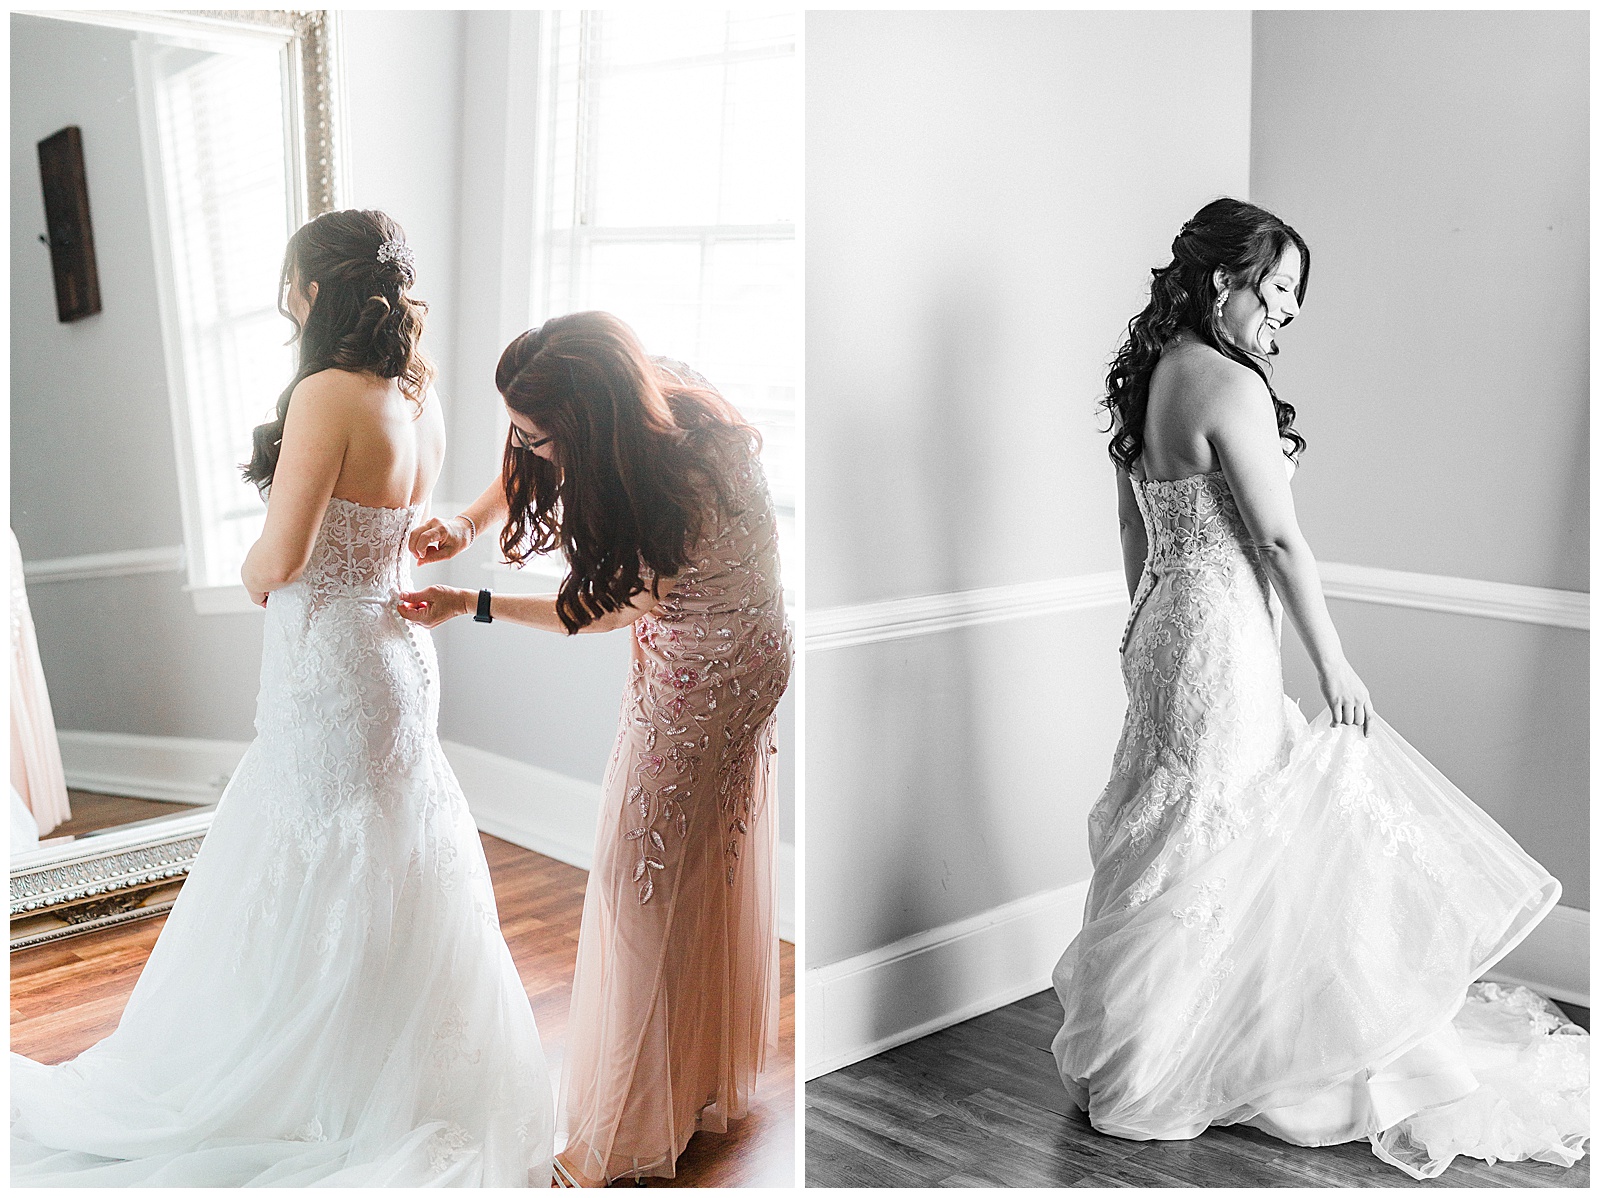 Bride Getting Ready in Lace Wedding Dress from Light and Airy Outdoor Wedding at Separk Mansion in Gastonia, NC | Kevyn Dixon Photography